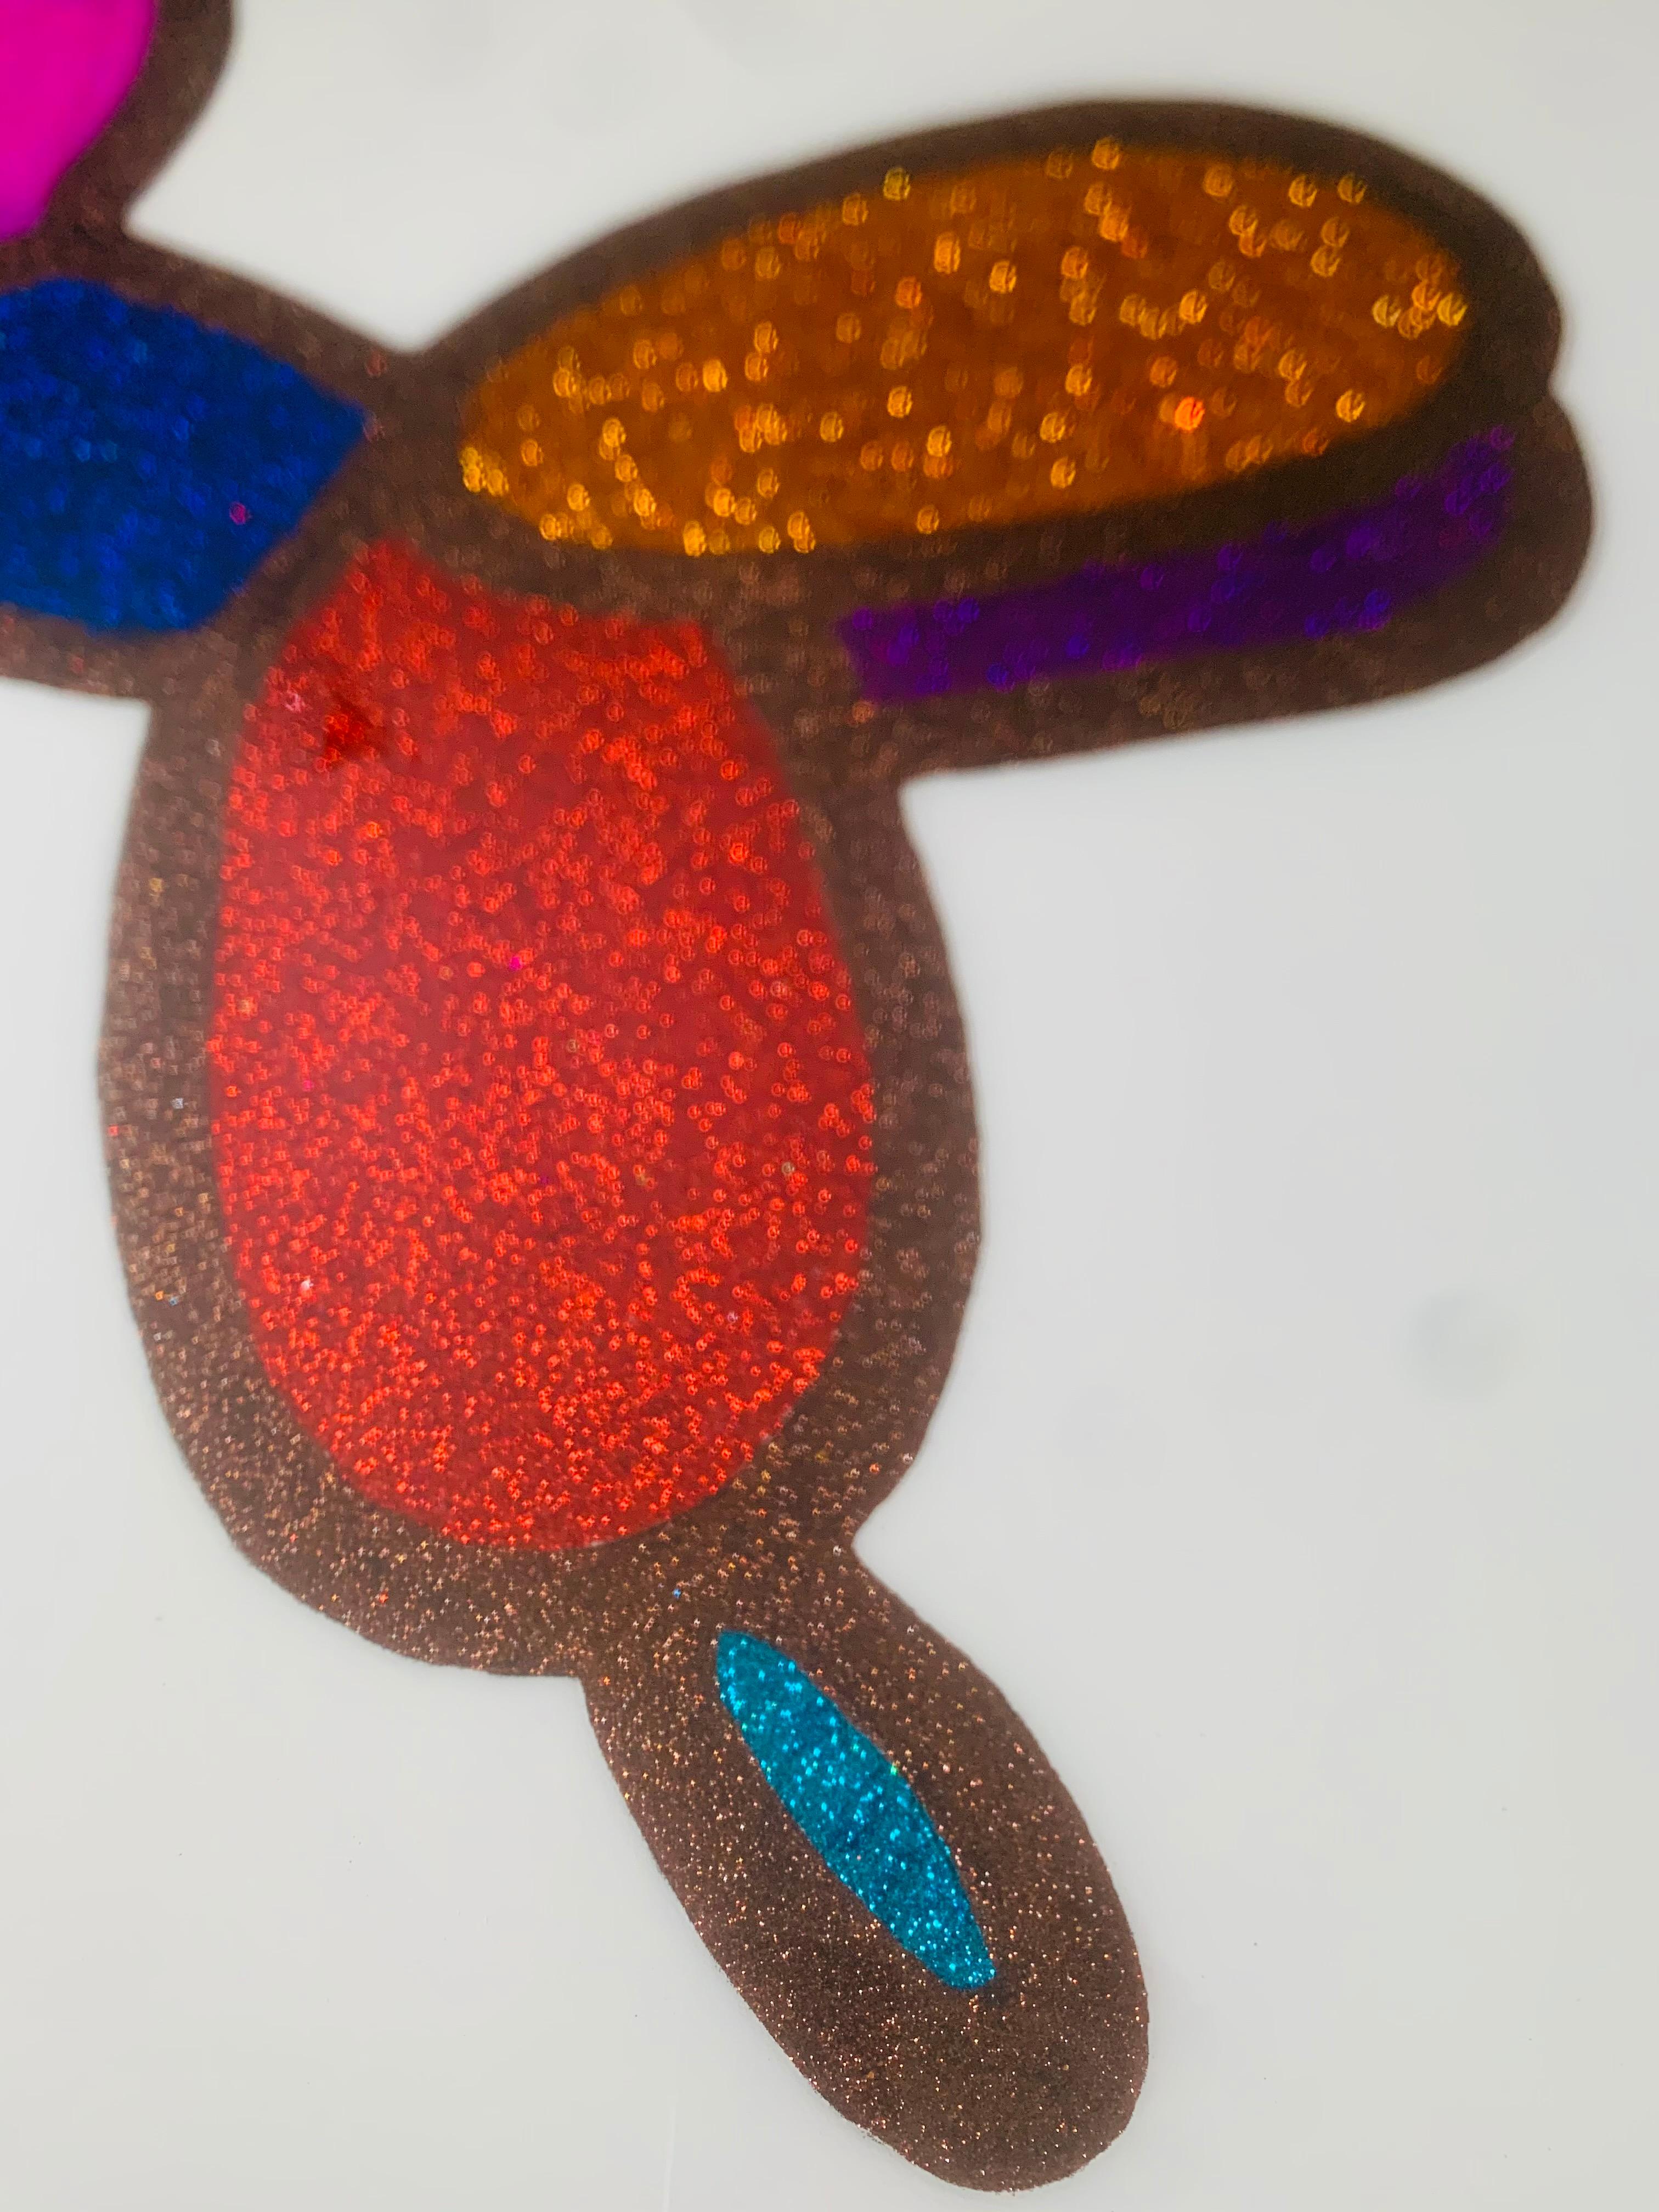 Farting Glitter Balloon Dog II (Limited Edition Of Only 30 Prints) For Sale 7